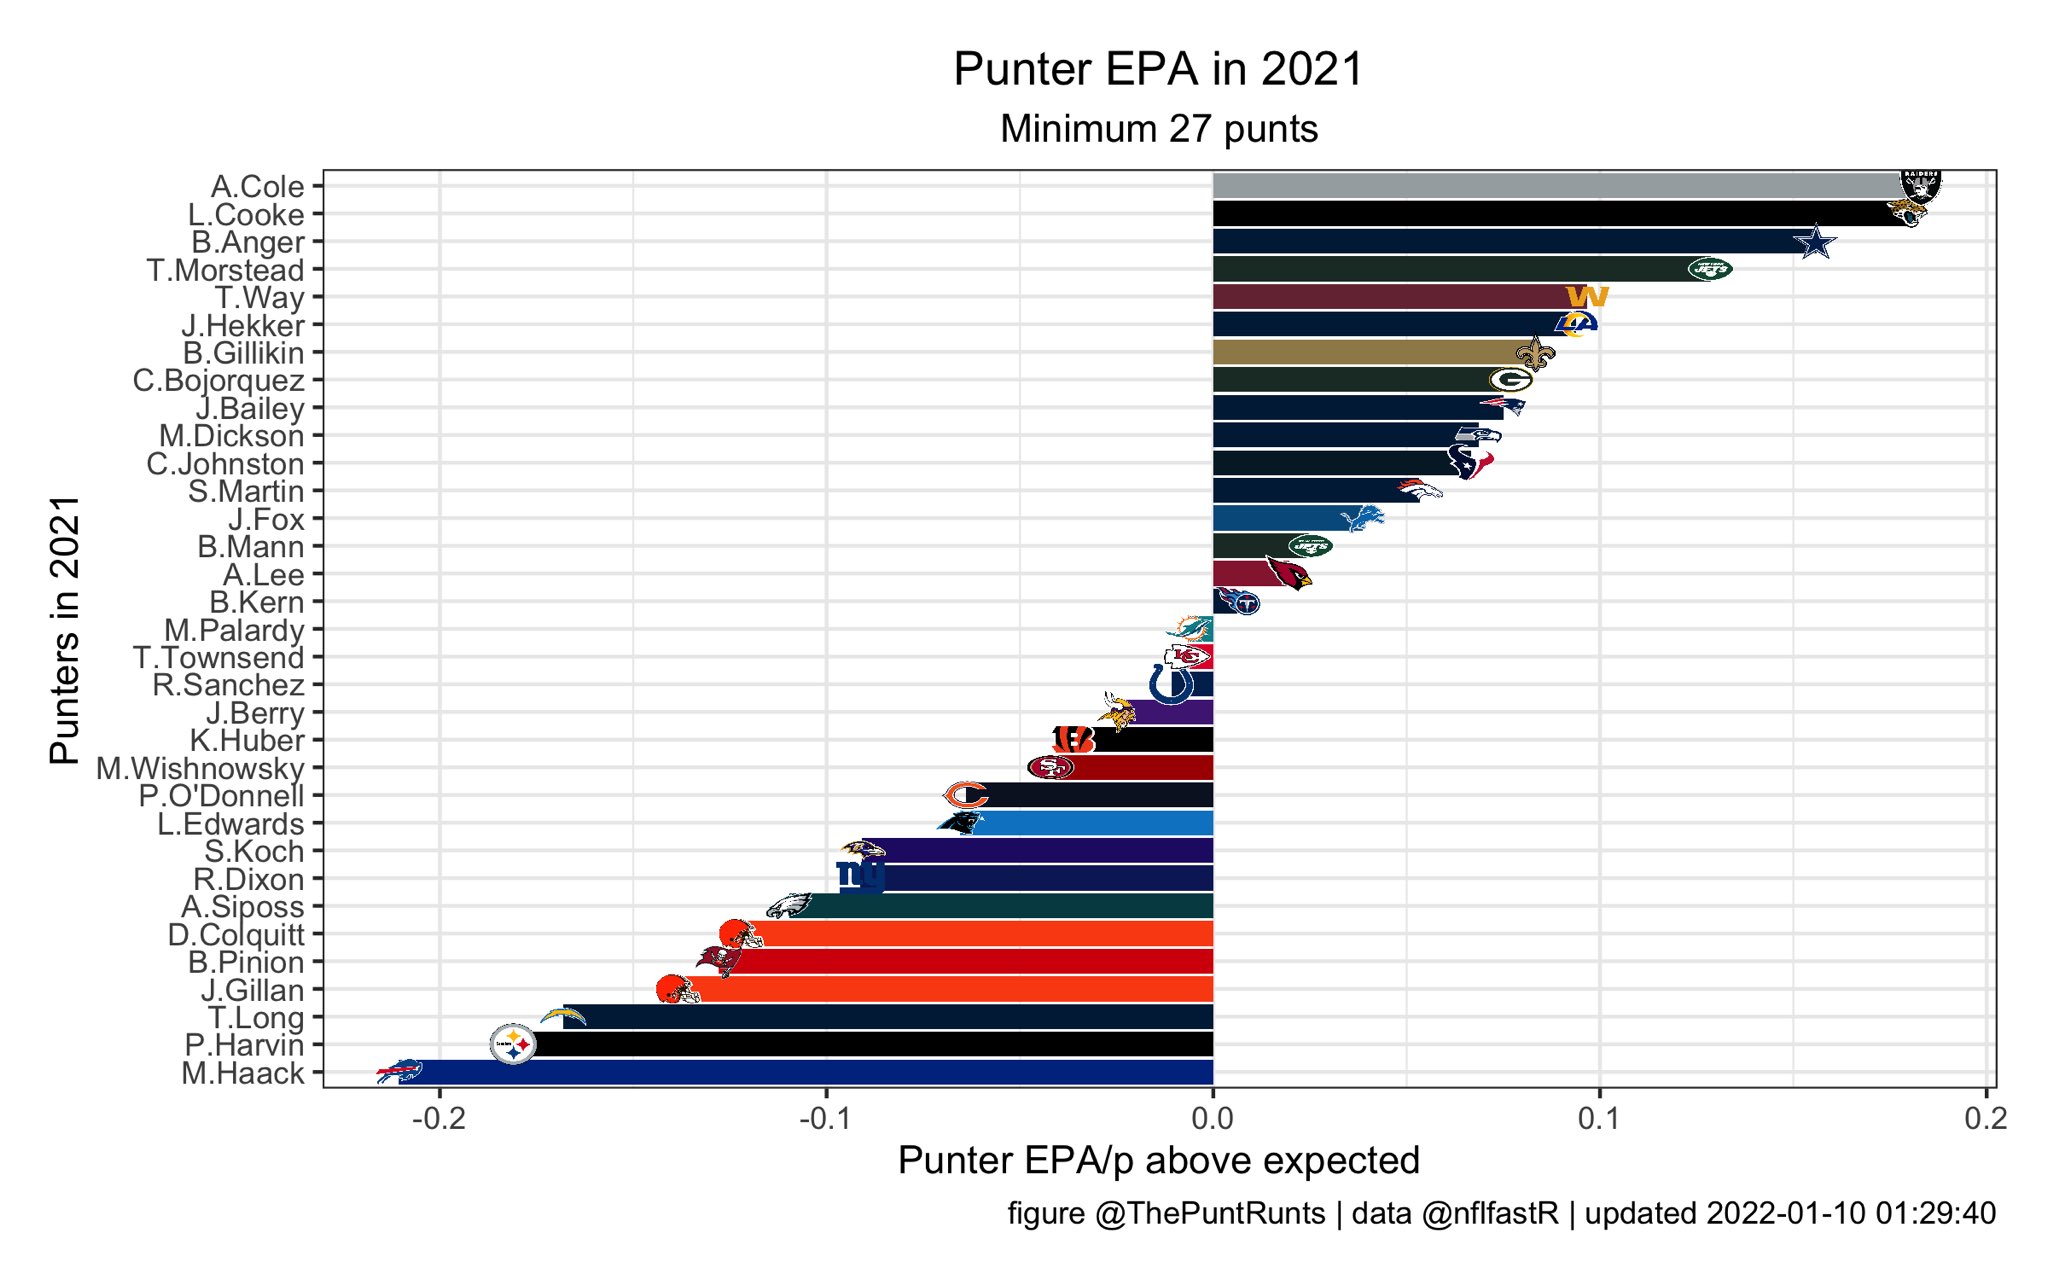 Punting EPA Per Punt Above Expected 2021